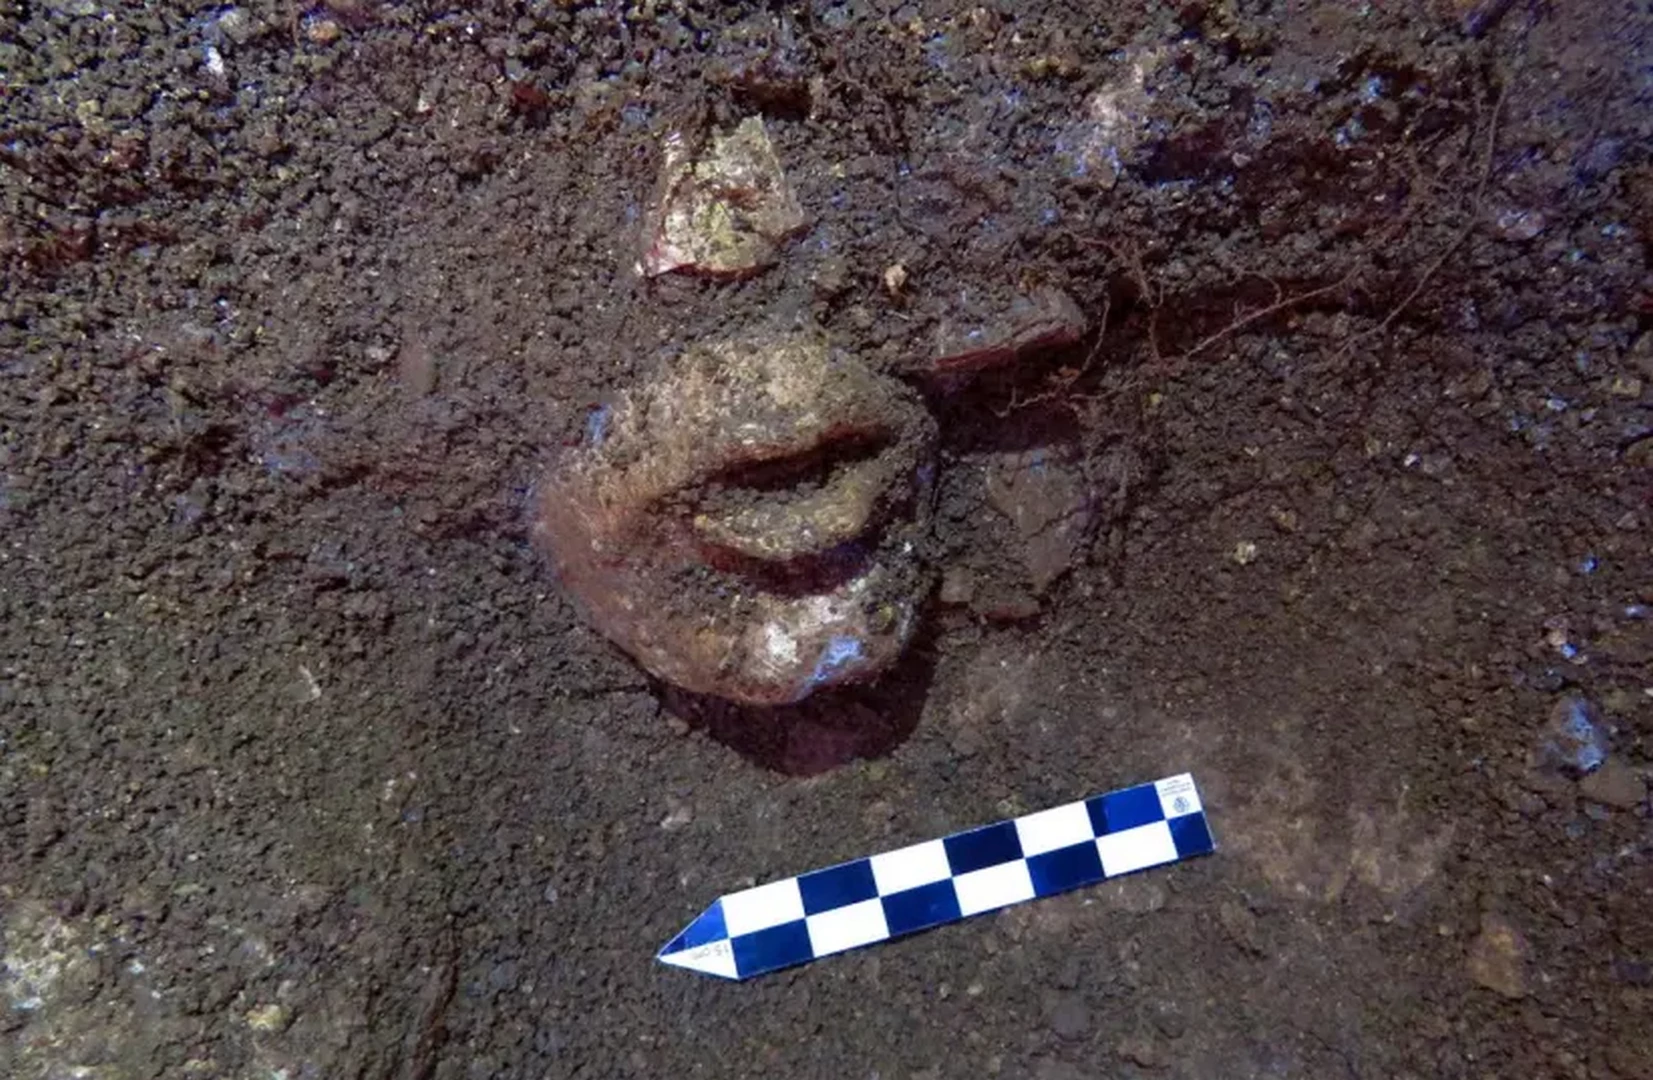 Figurine of Greek love god and more historical treasures uncovered in Italy